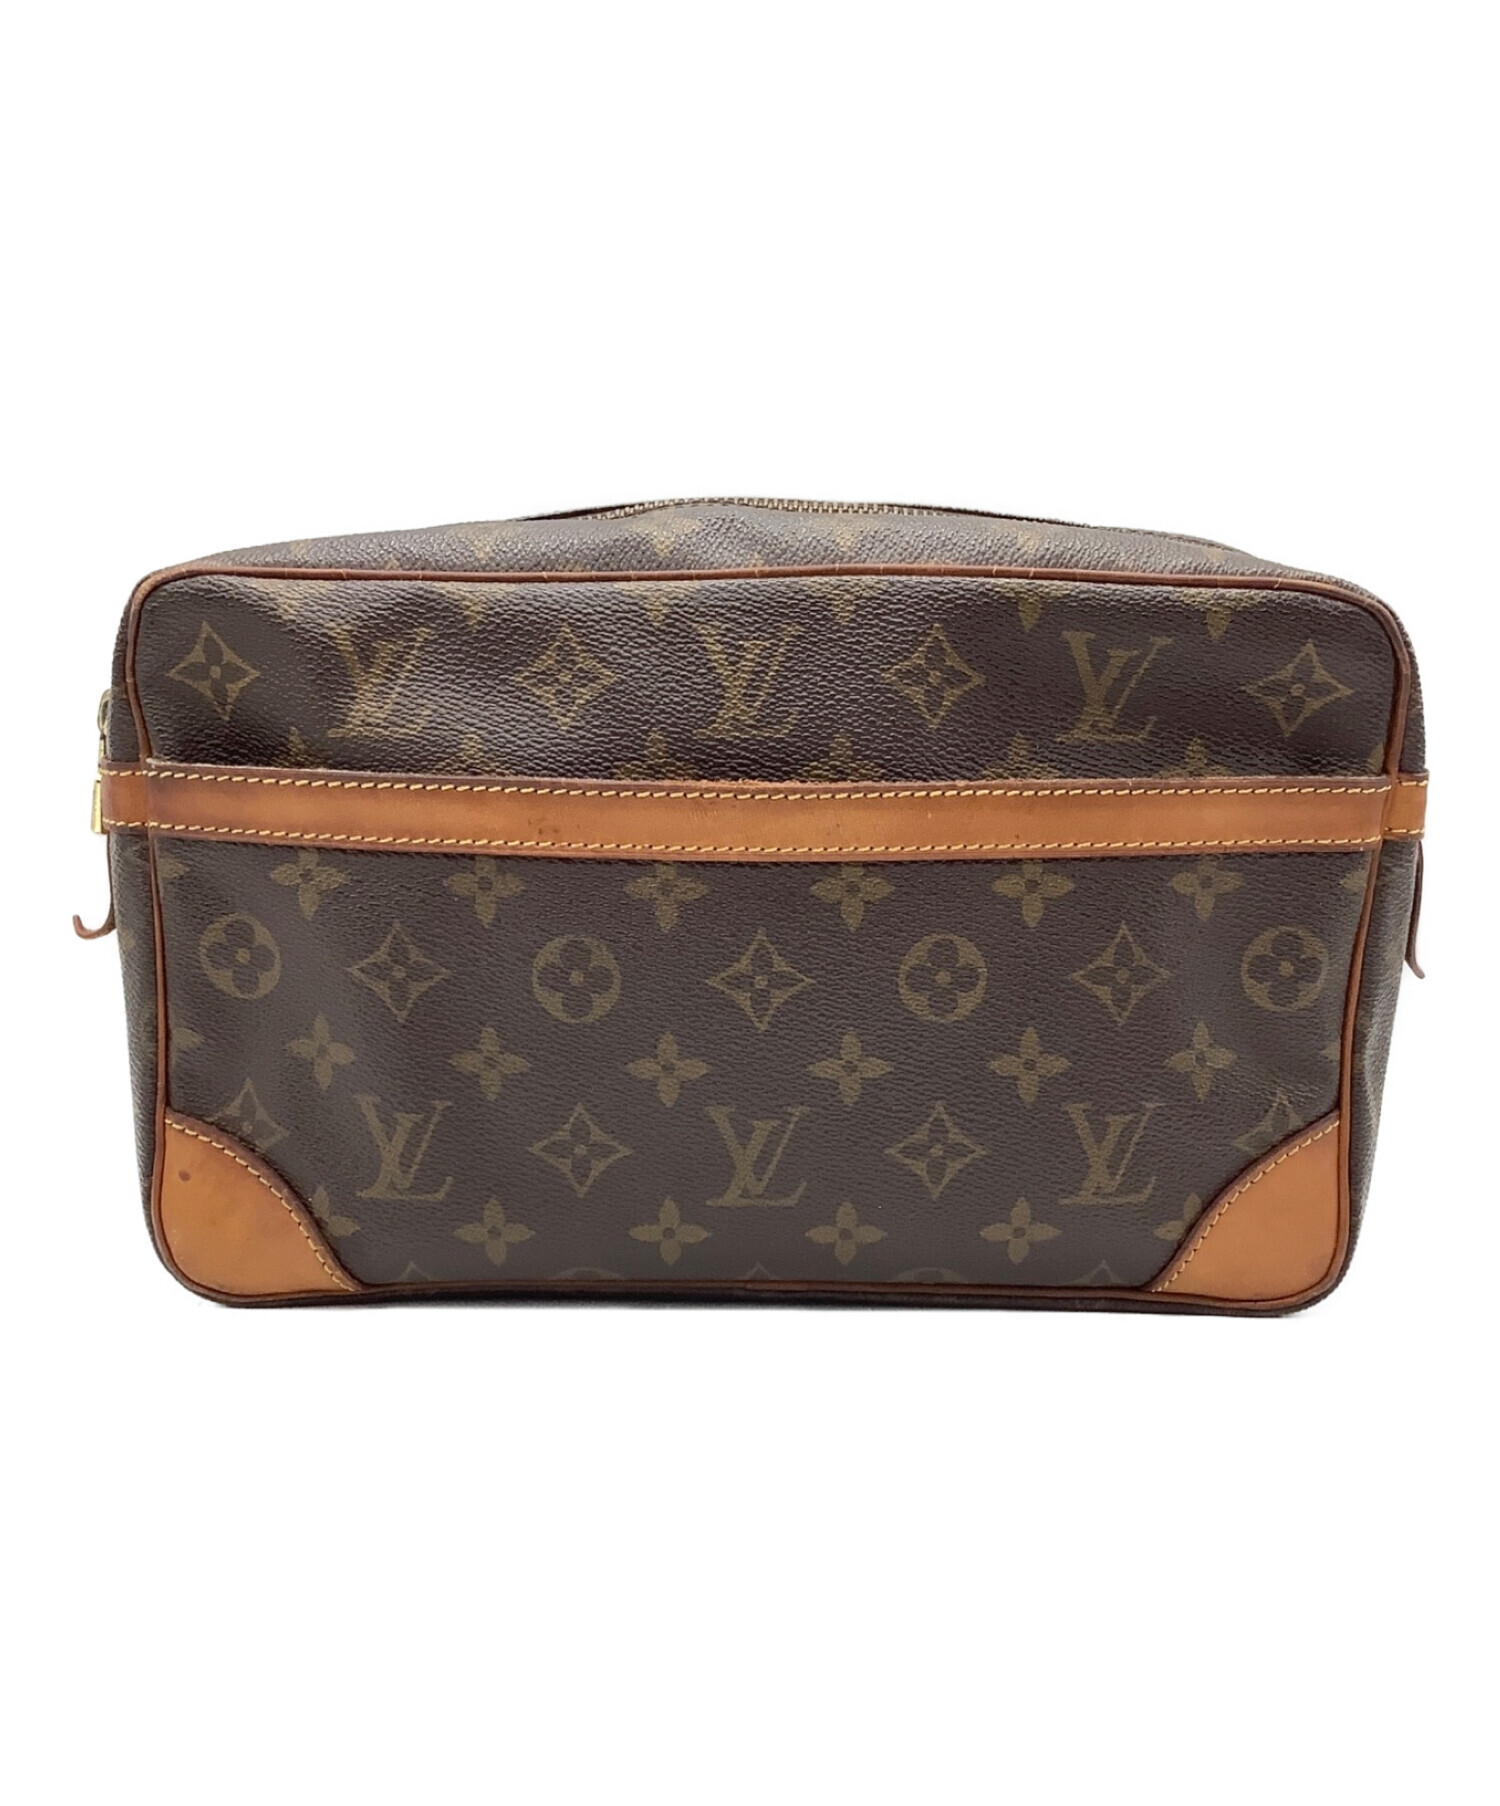 LOUIS VUITTON (ルイ ヴィトン) コンピエーニュ28